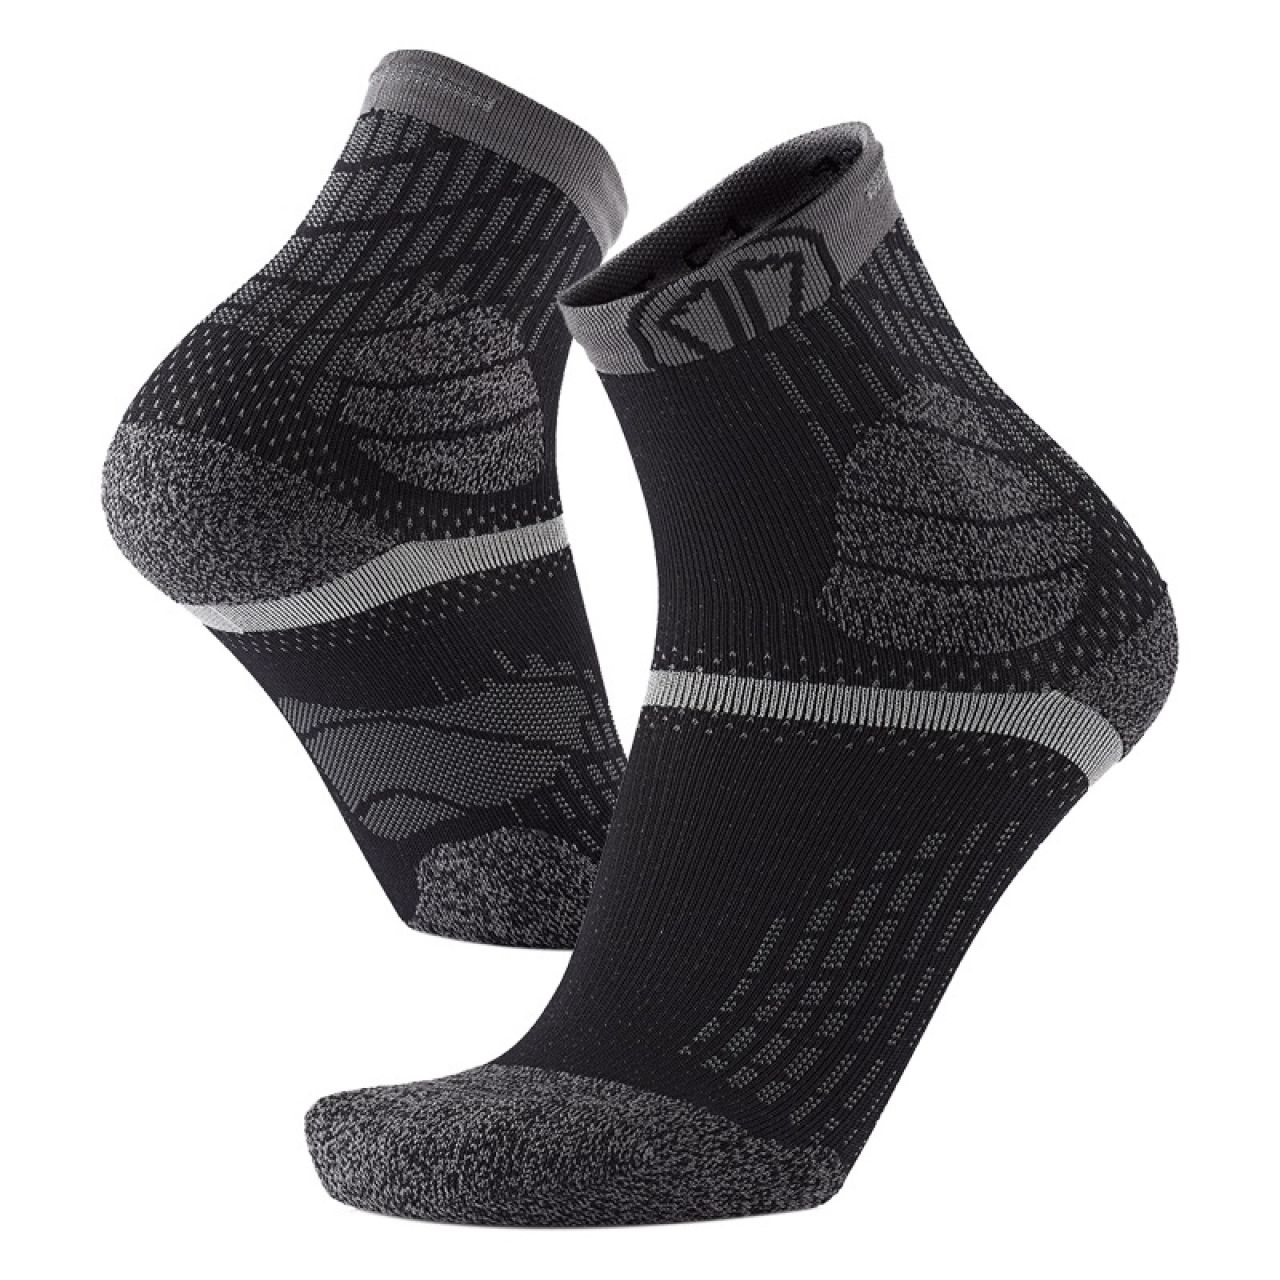 SIDAS CHAUSSETTES TRAIL PROTECT BLACK GREY Chaussettes de running